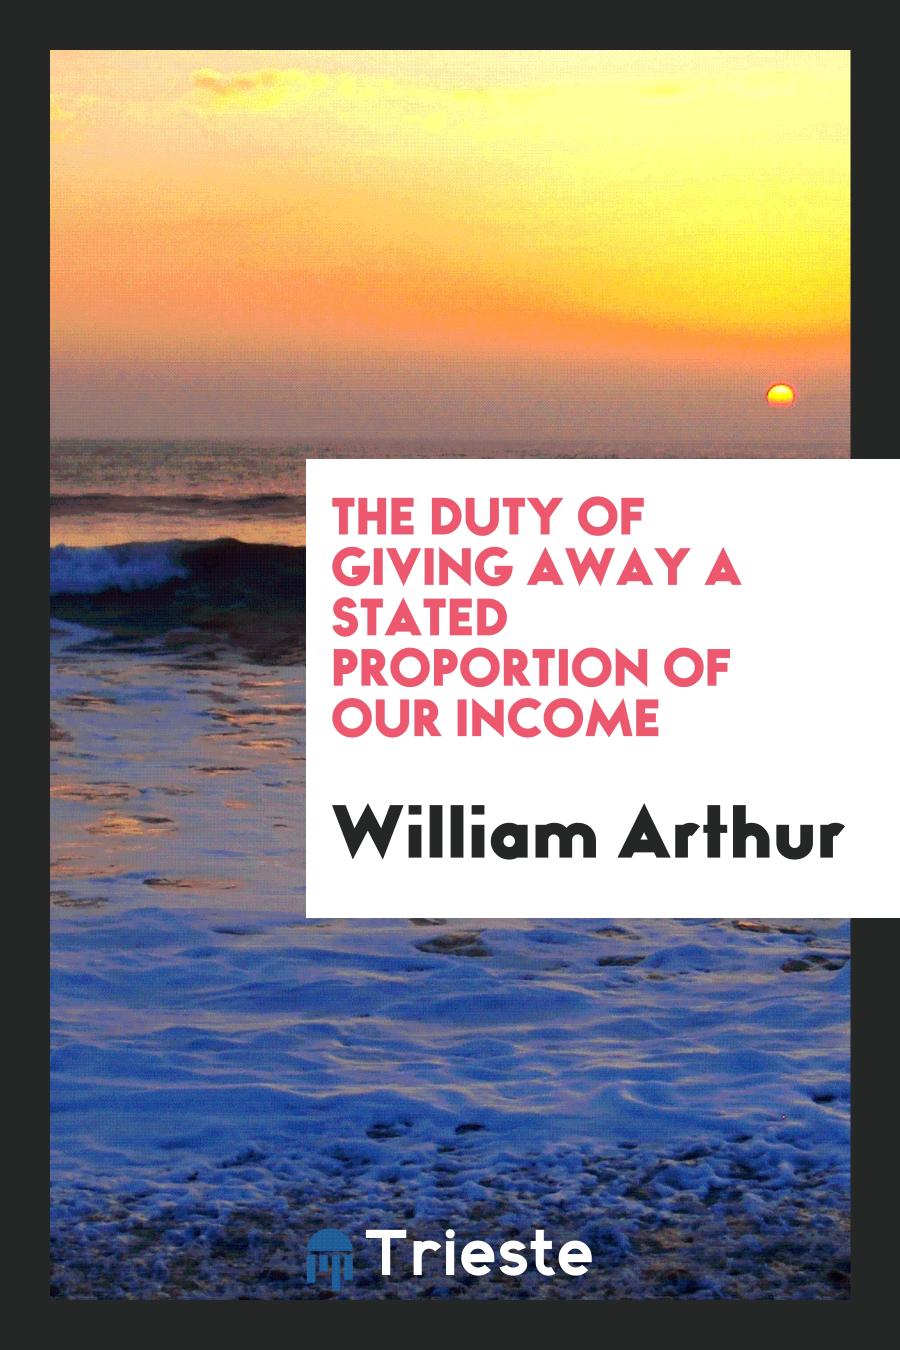 The Duty of Giving Away a Stated Proportion of Our Income